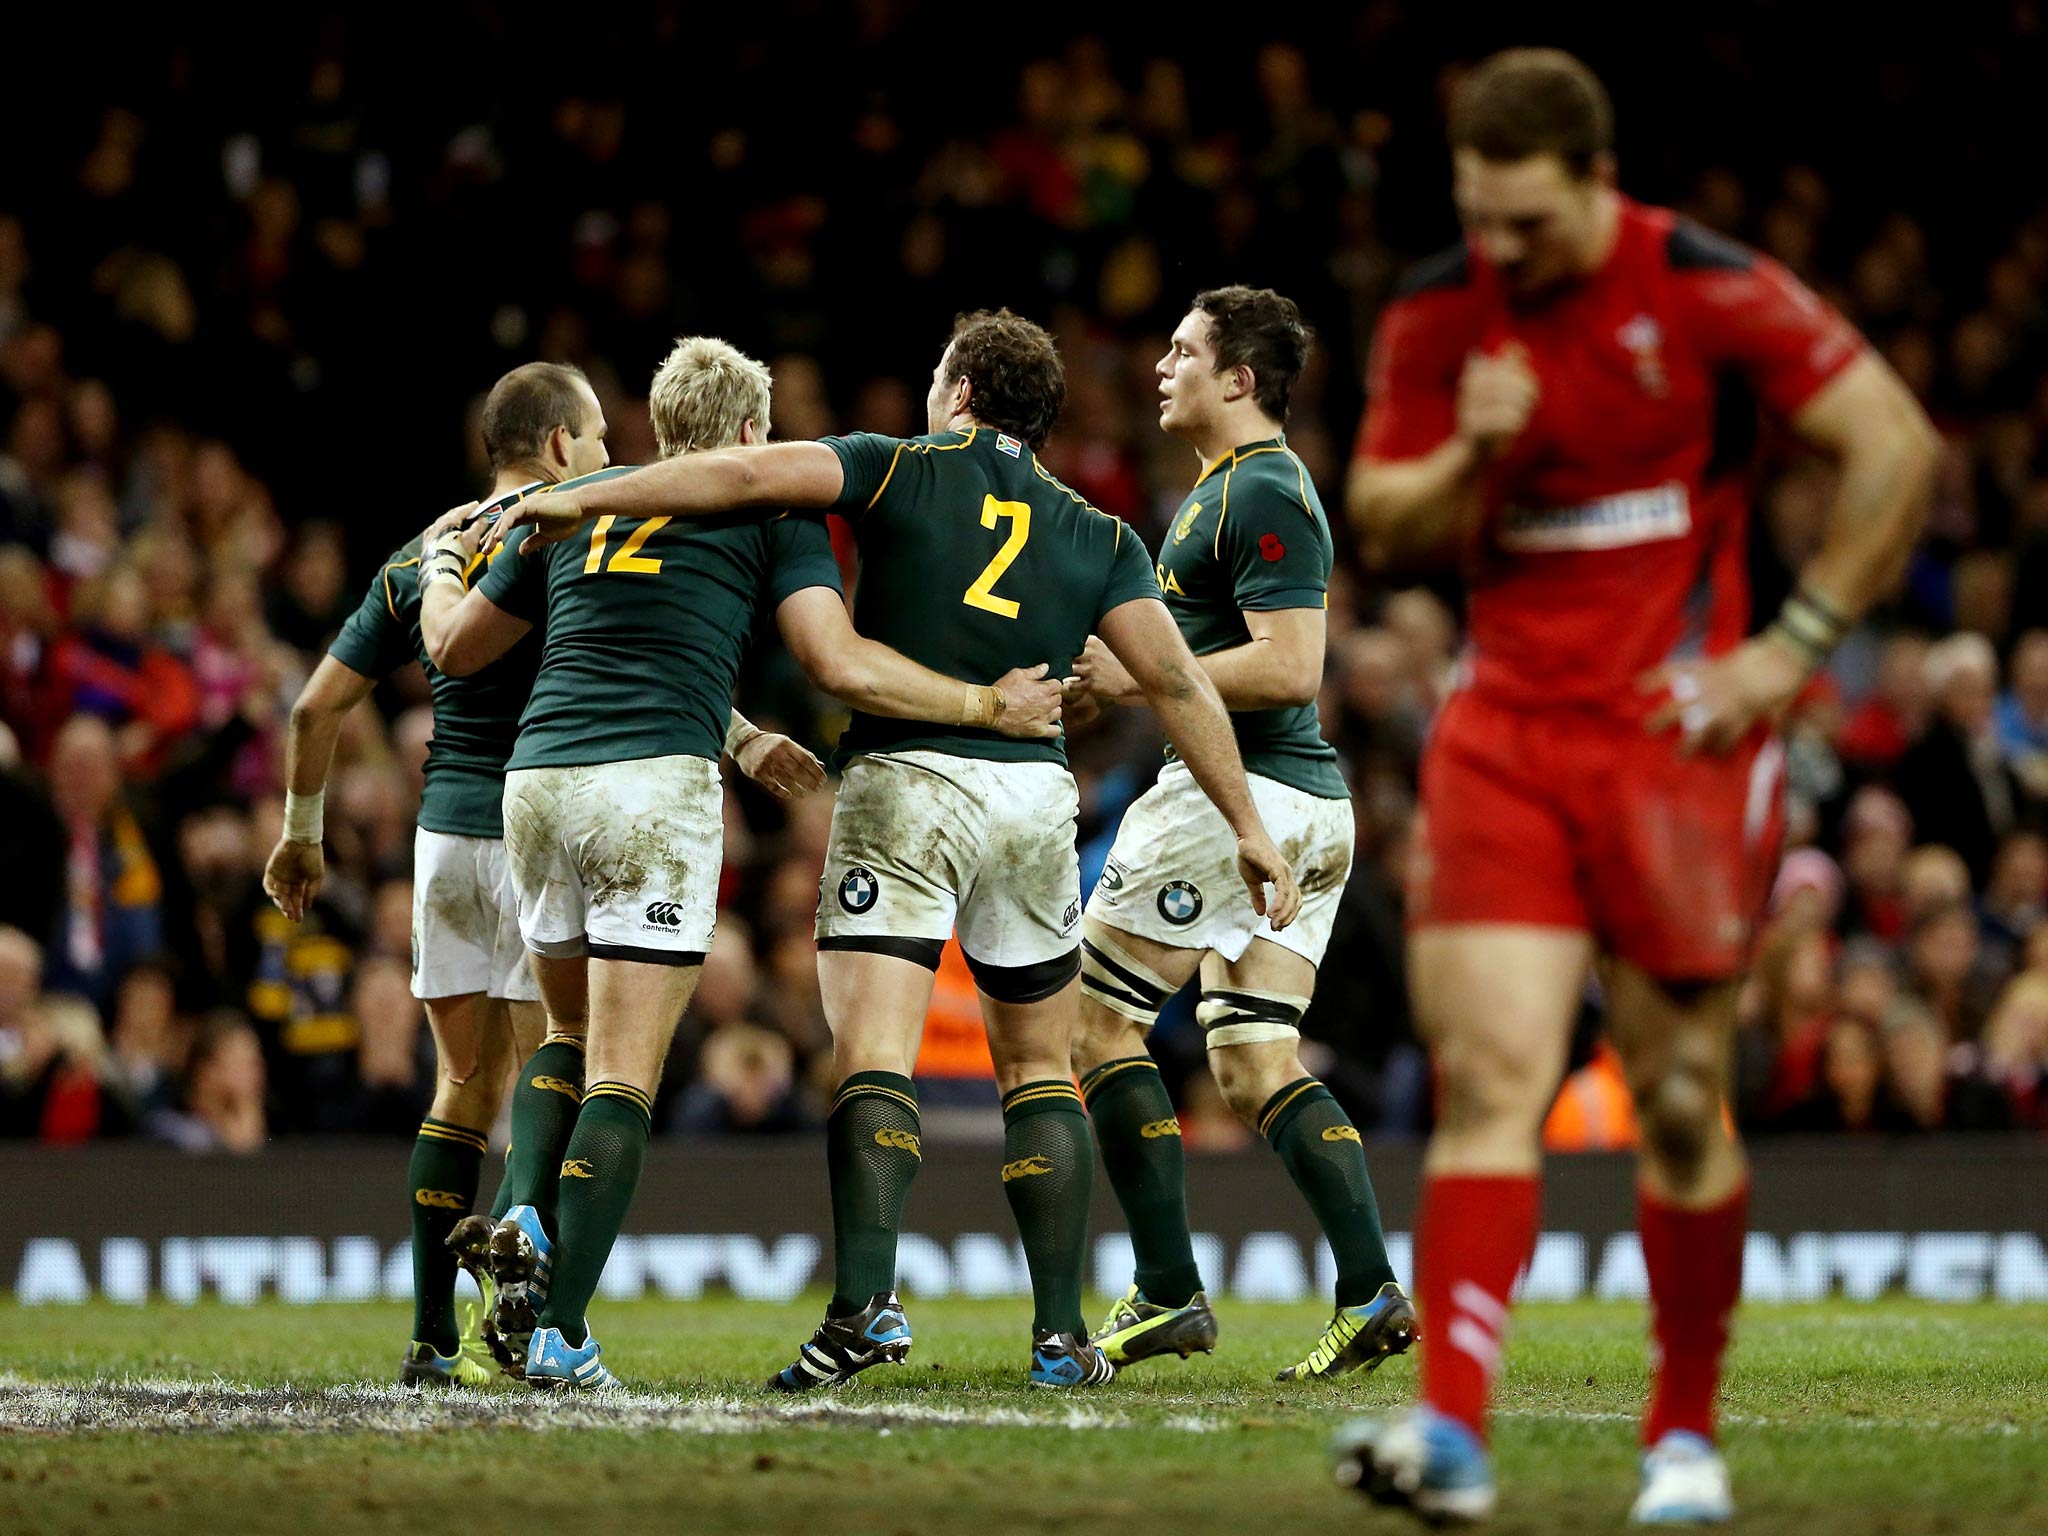 South Africa celebrate a try as George North of Wales looks dejected